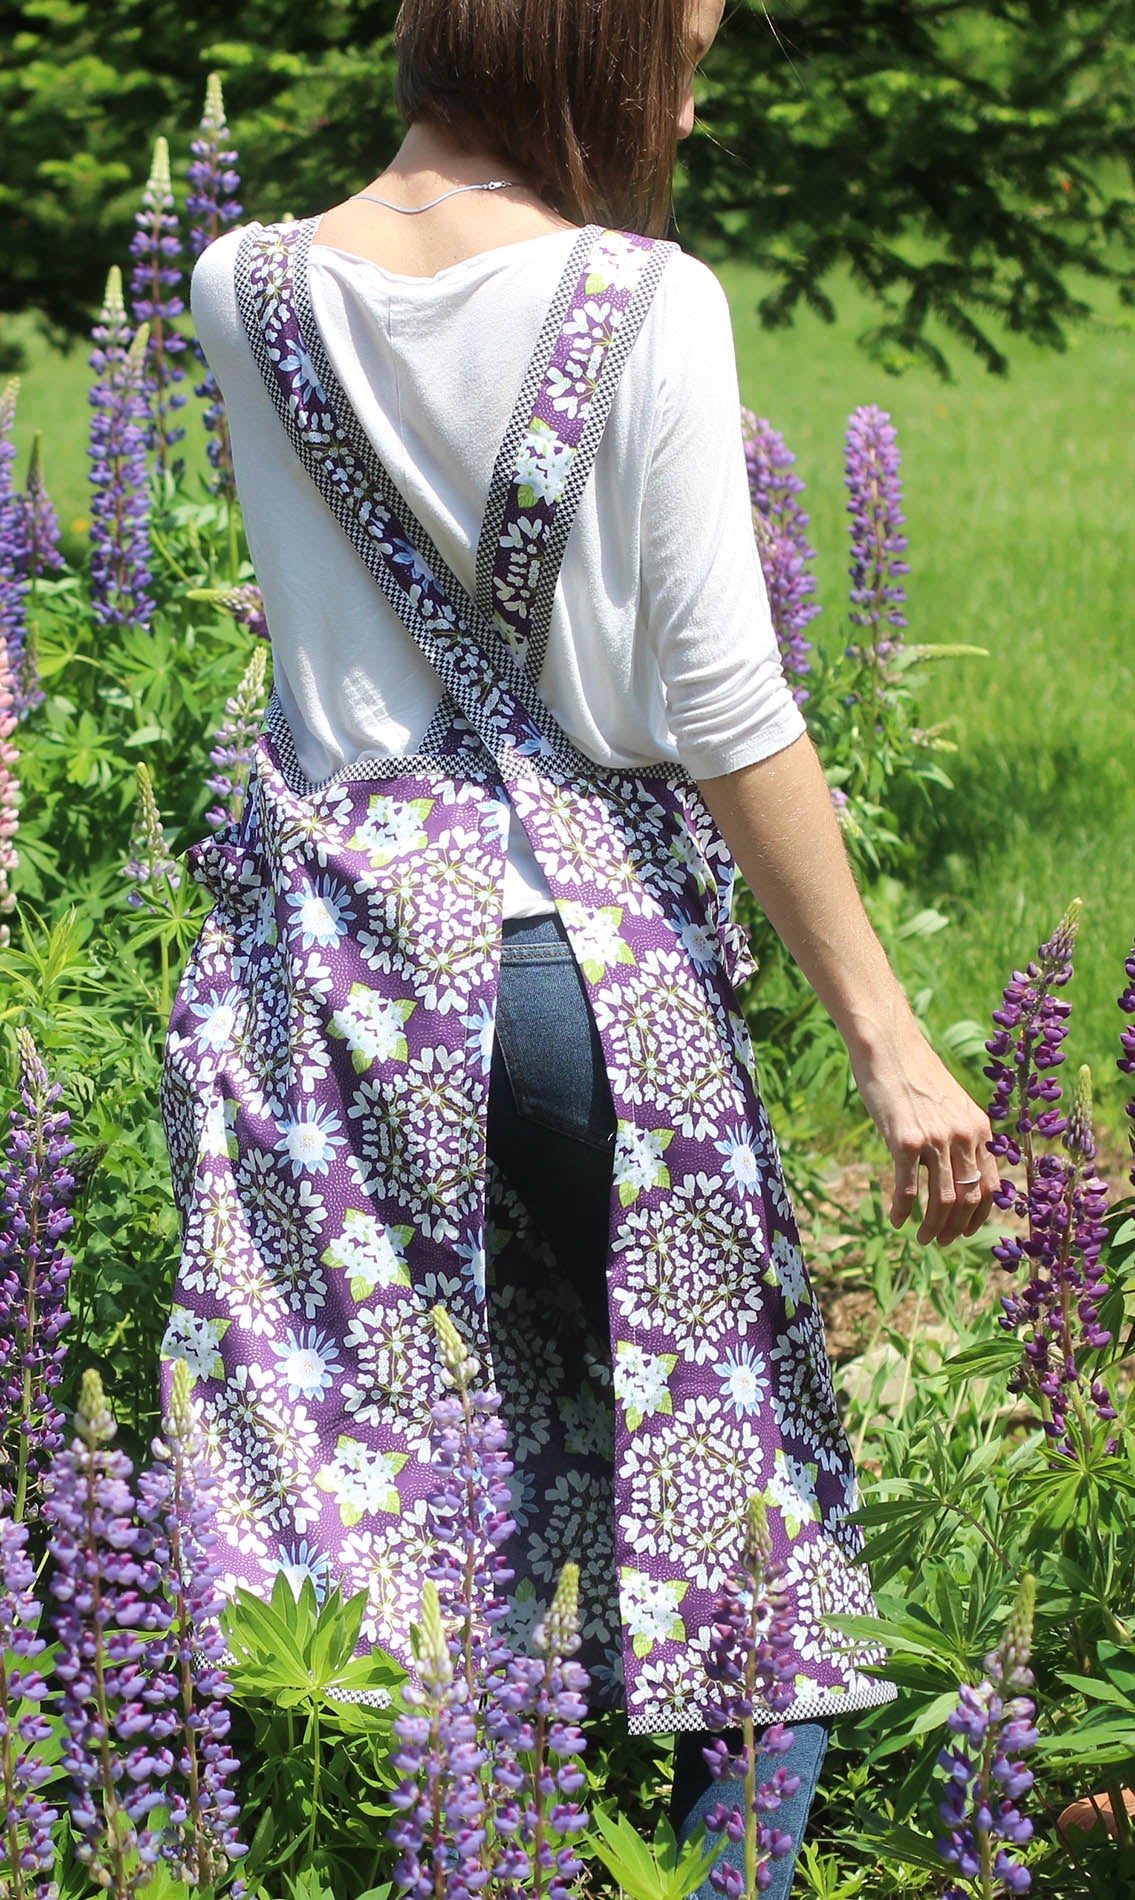 XS-5X Purple Craziness - Back View with lupines